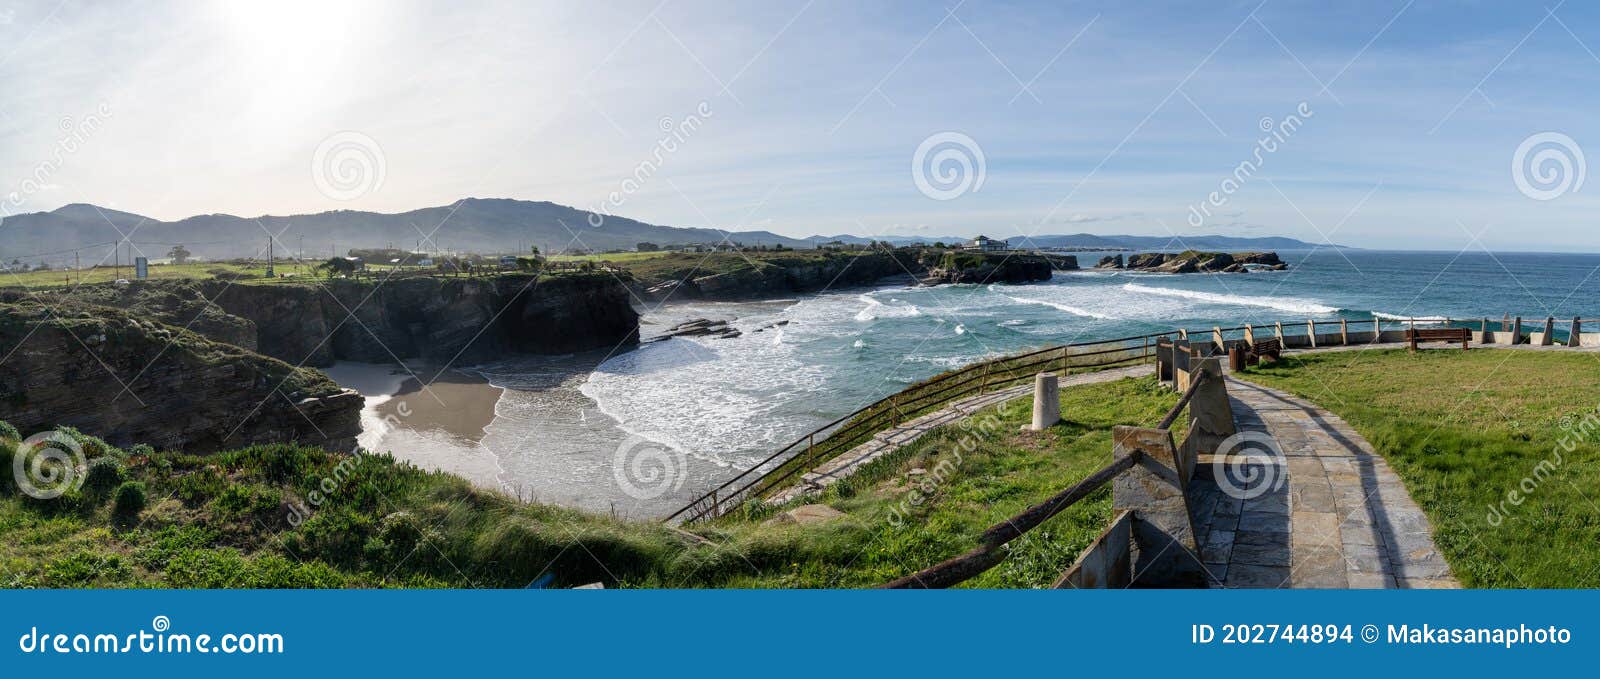 view of the coast and beaches near playa de catedrales in galicia